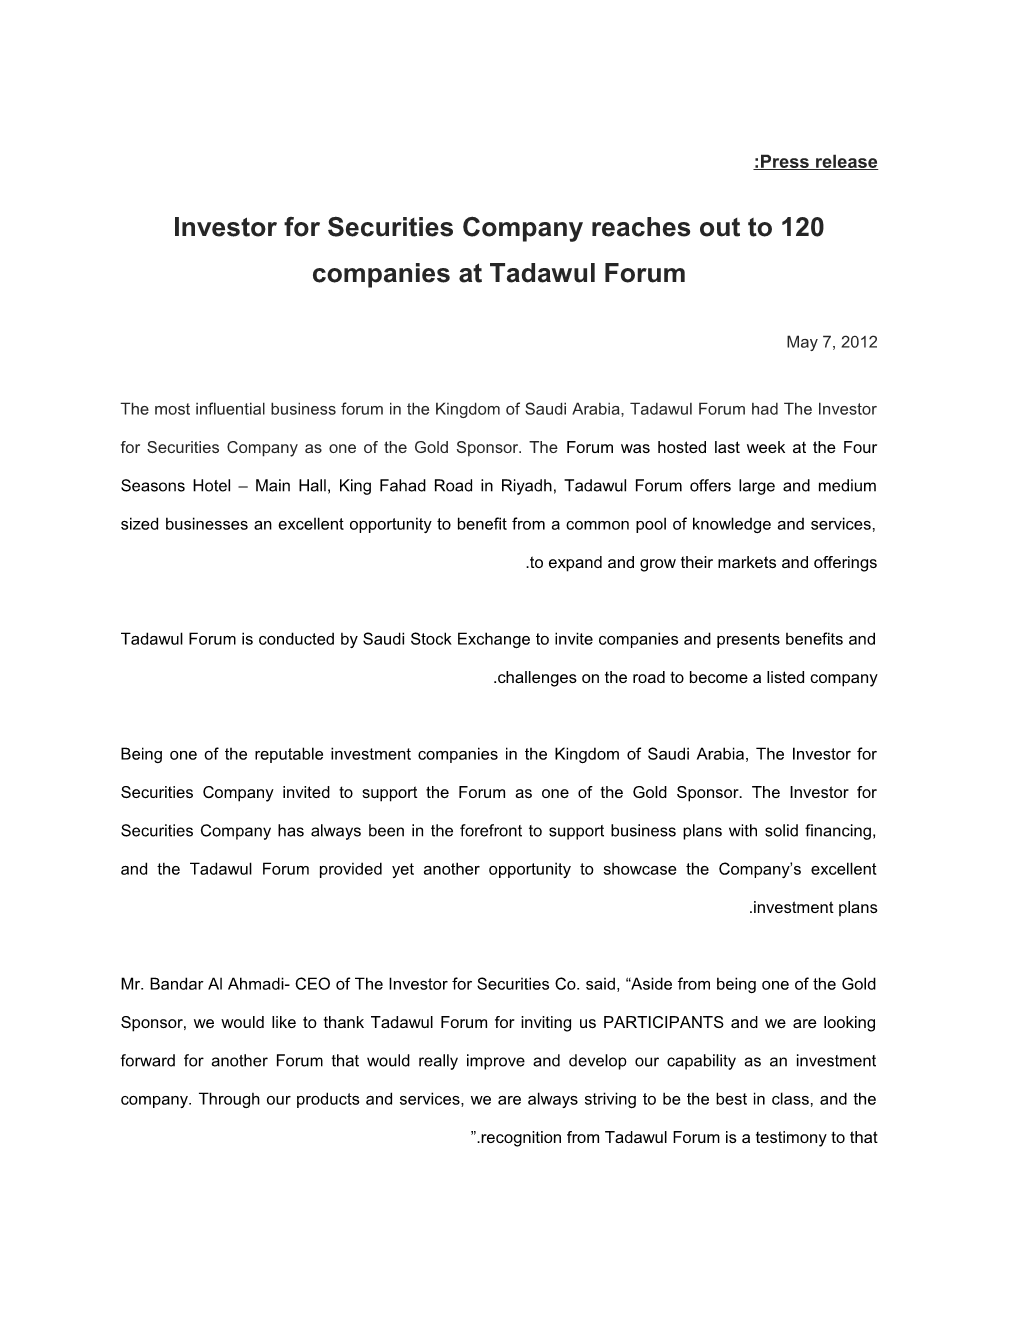 PR - the Investor for Securities - Tadawul Forum (English)